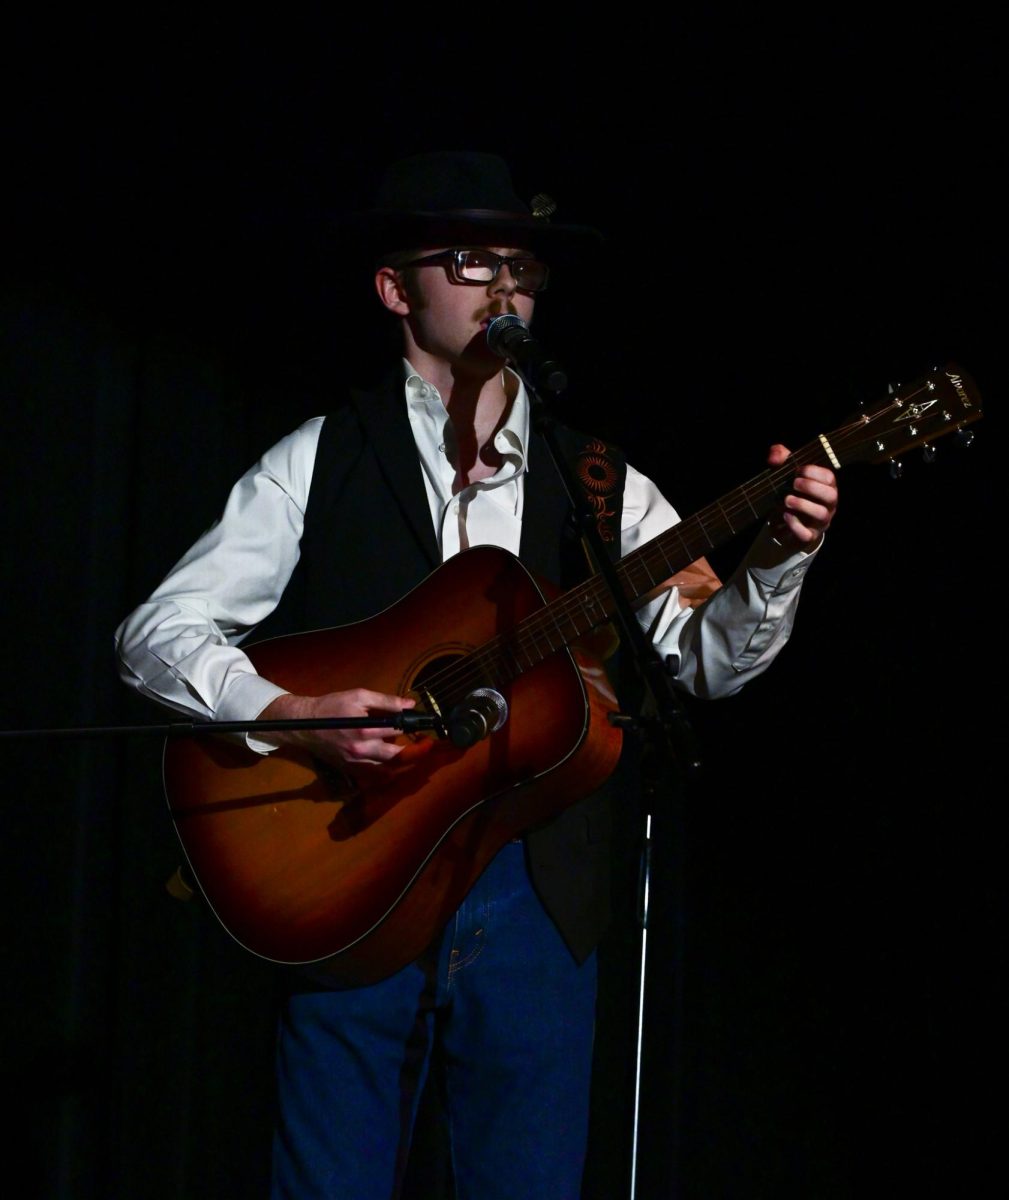 Singing an original song, senior Brett Charlton performs at the Talent show March 19 in the Auditorium. The song was dedicated to his ex. Photo by Ashley Broils
